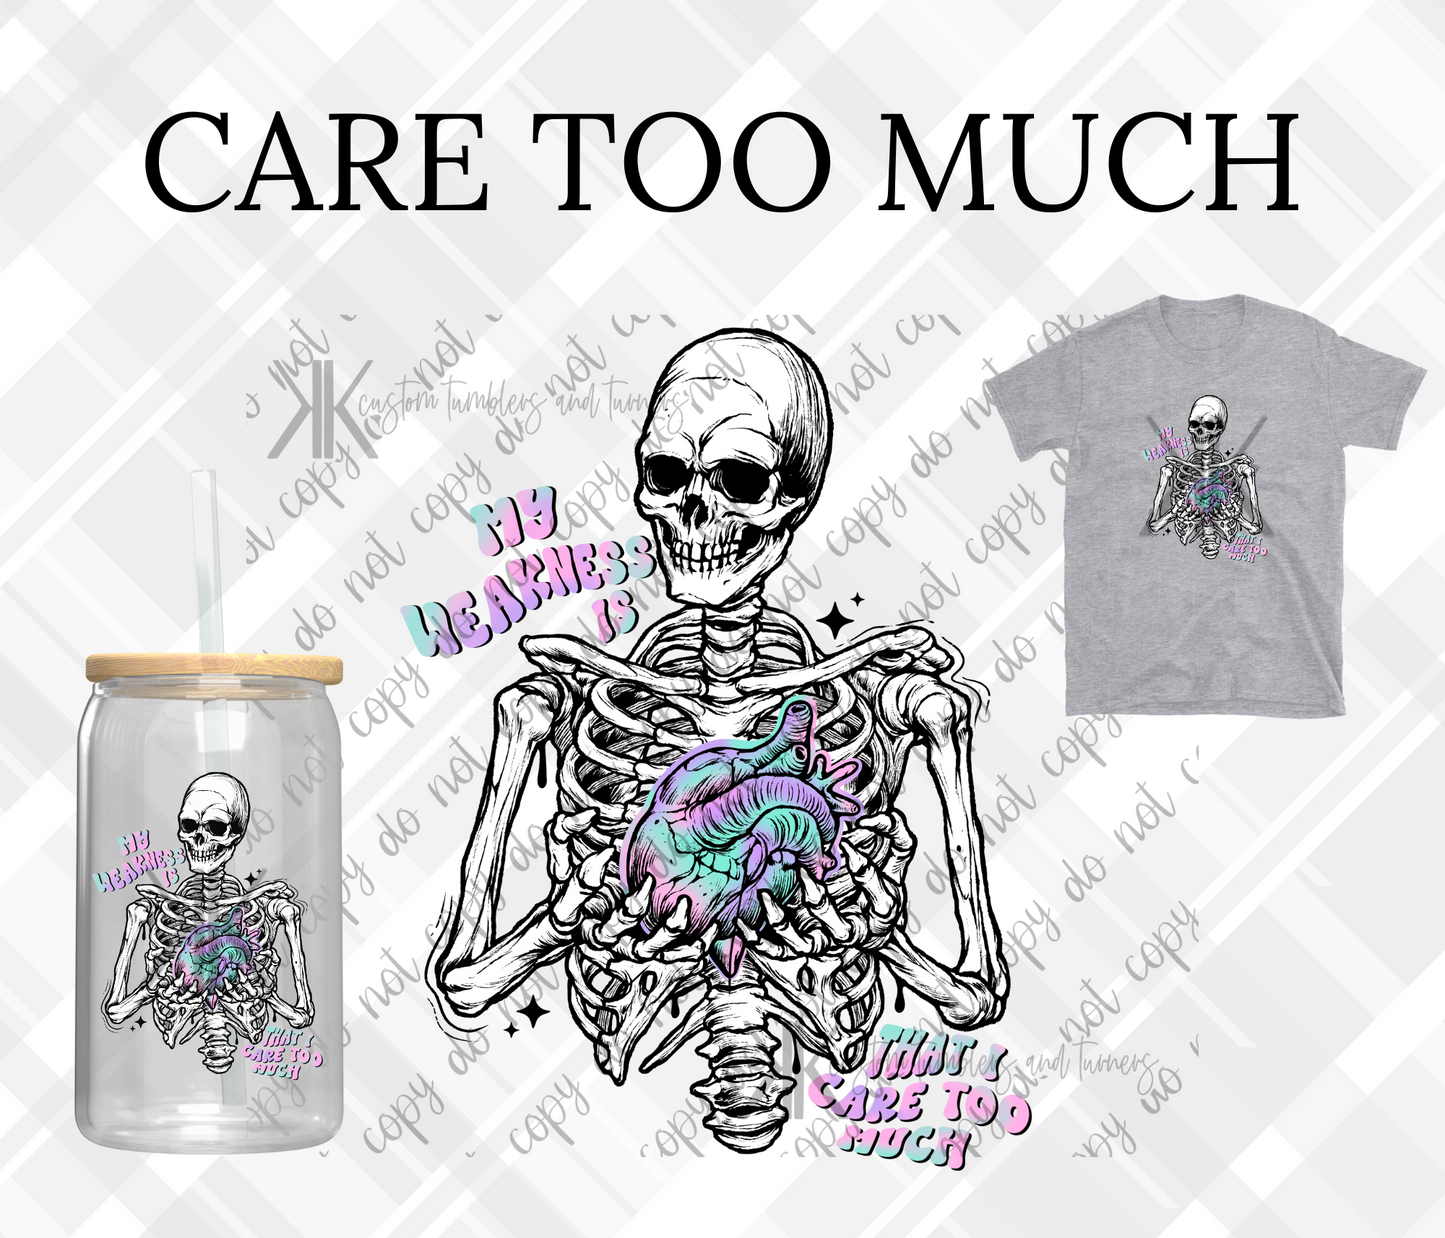 CARE TOO MUCH